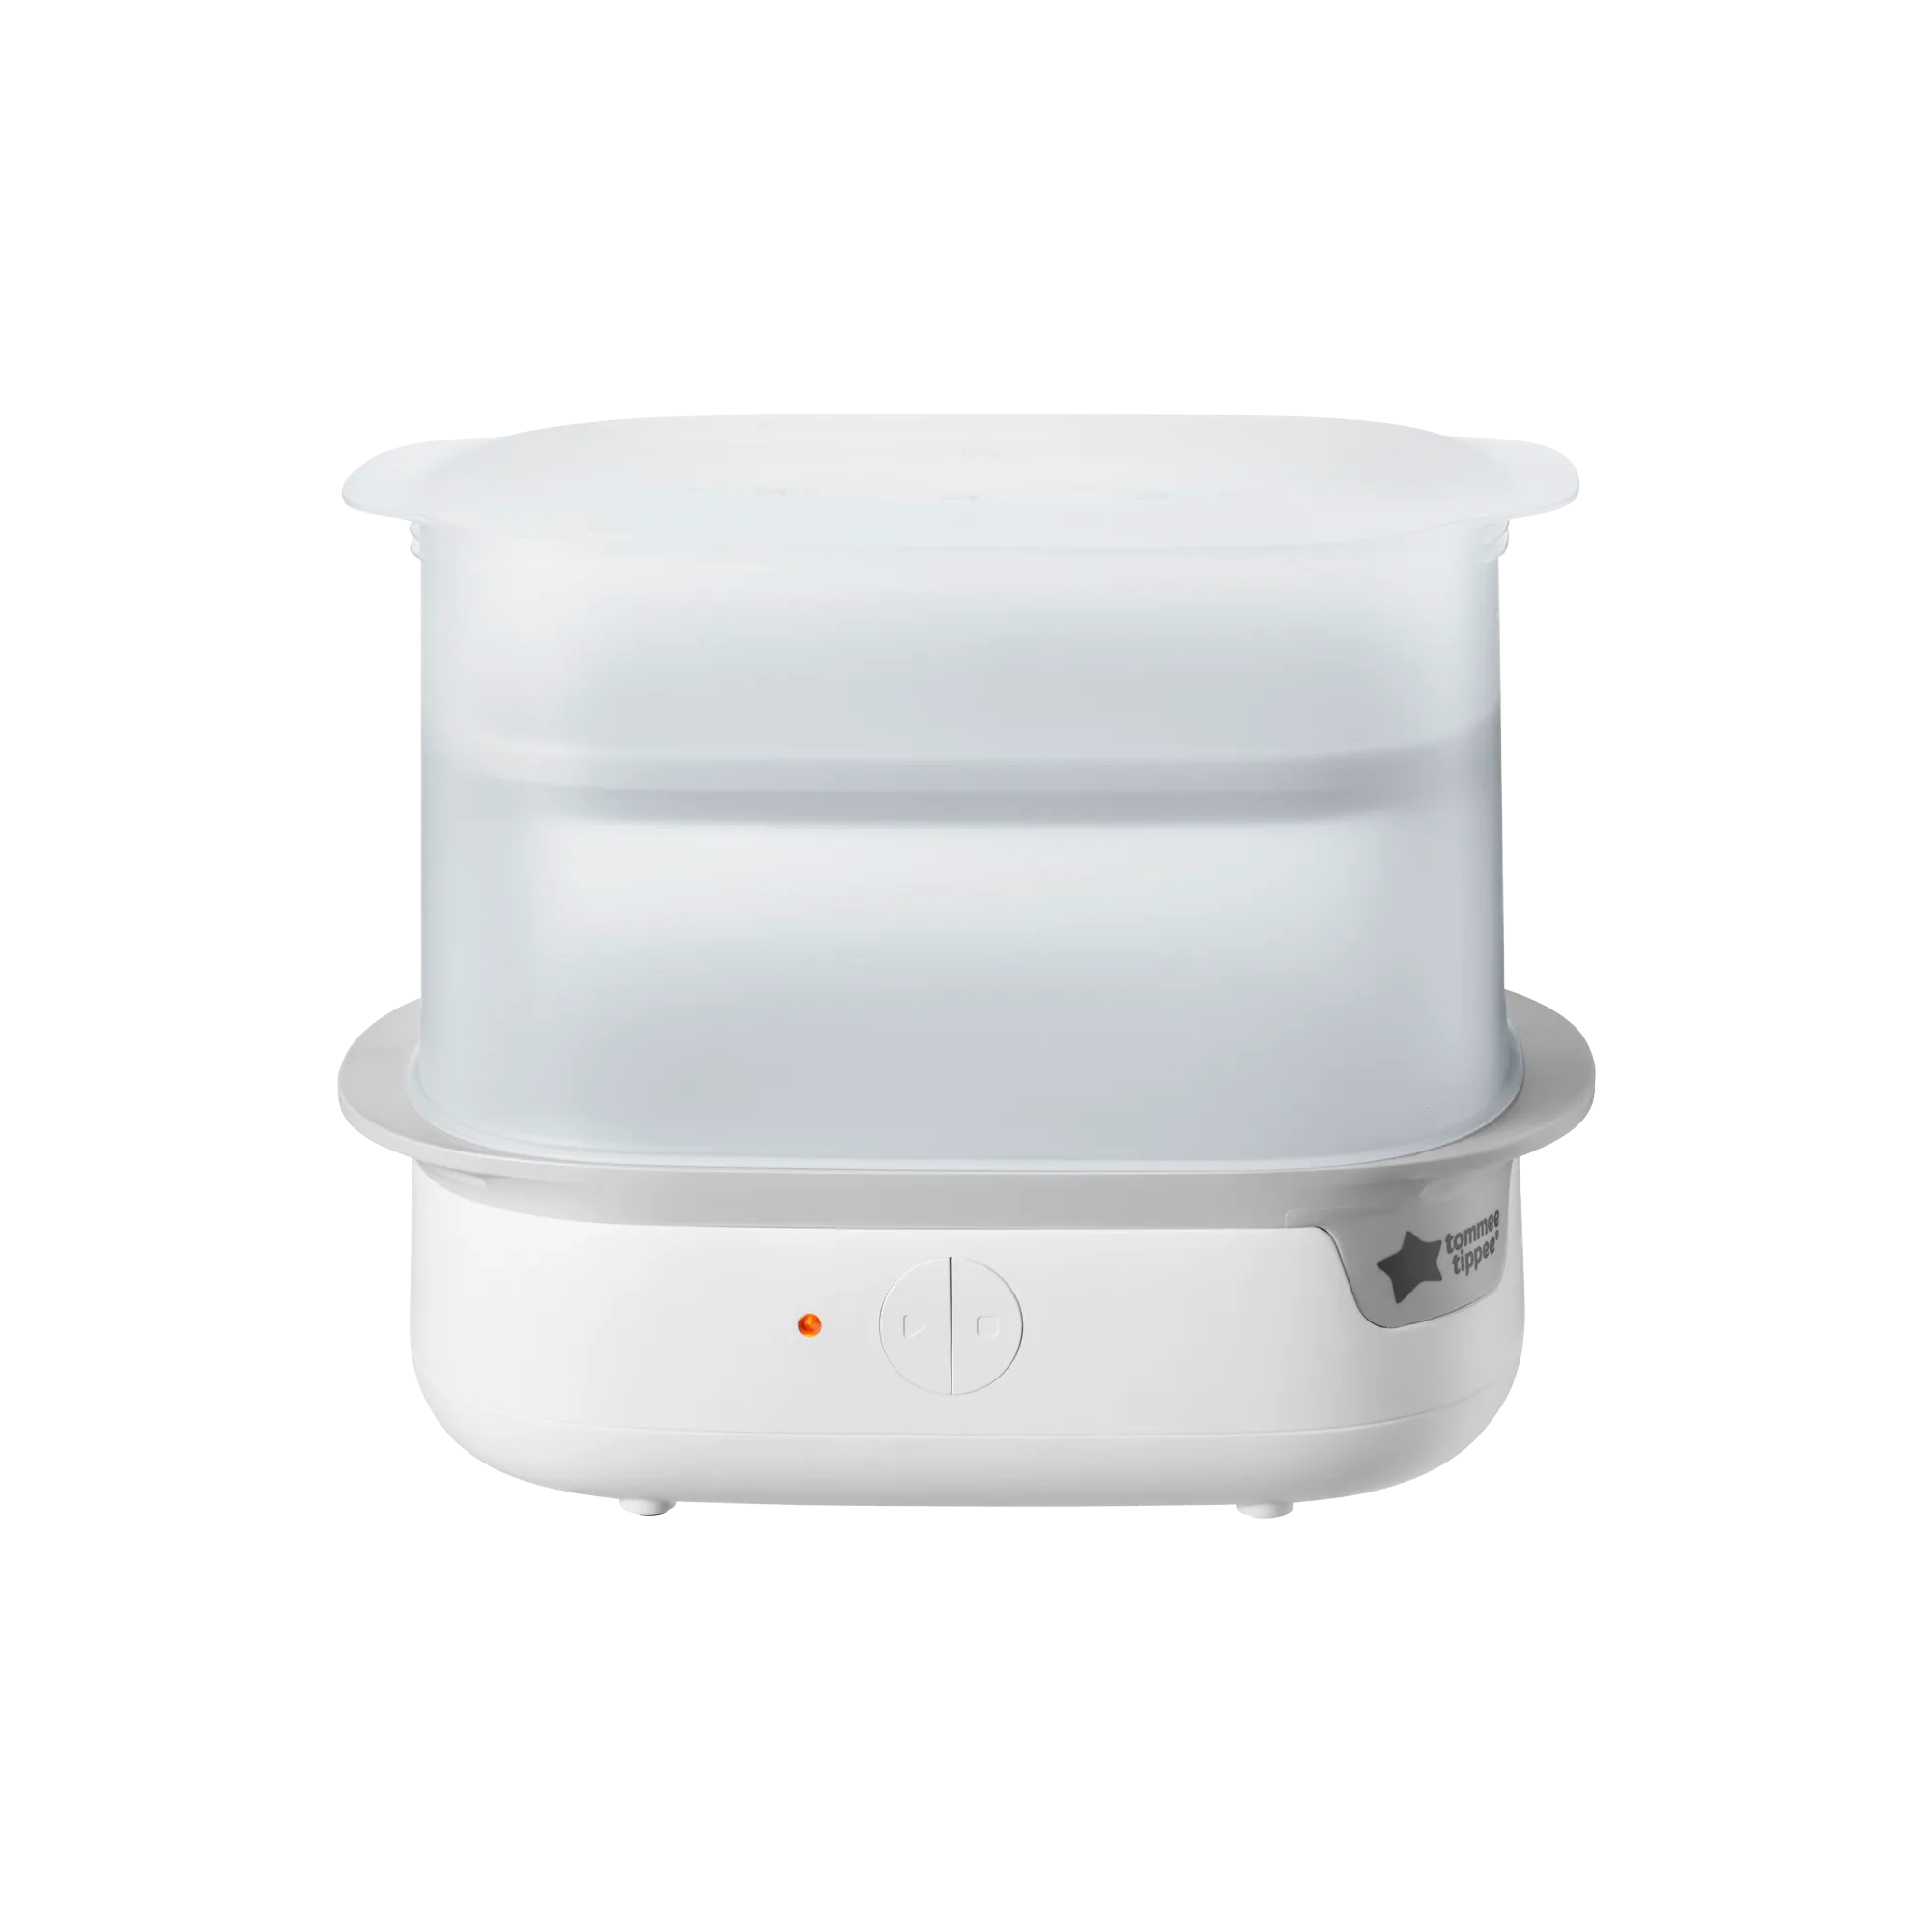 Tommee Tippee Super-Steam Advanced Electric Sterilizer